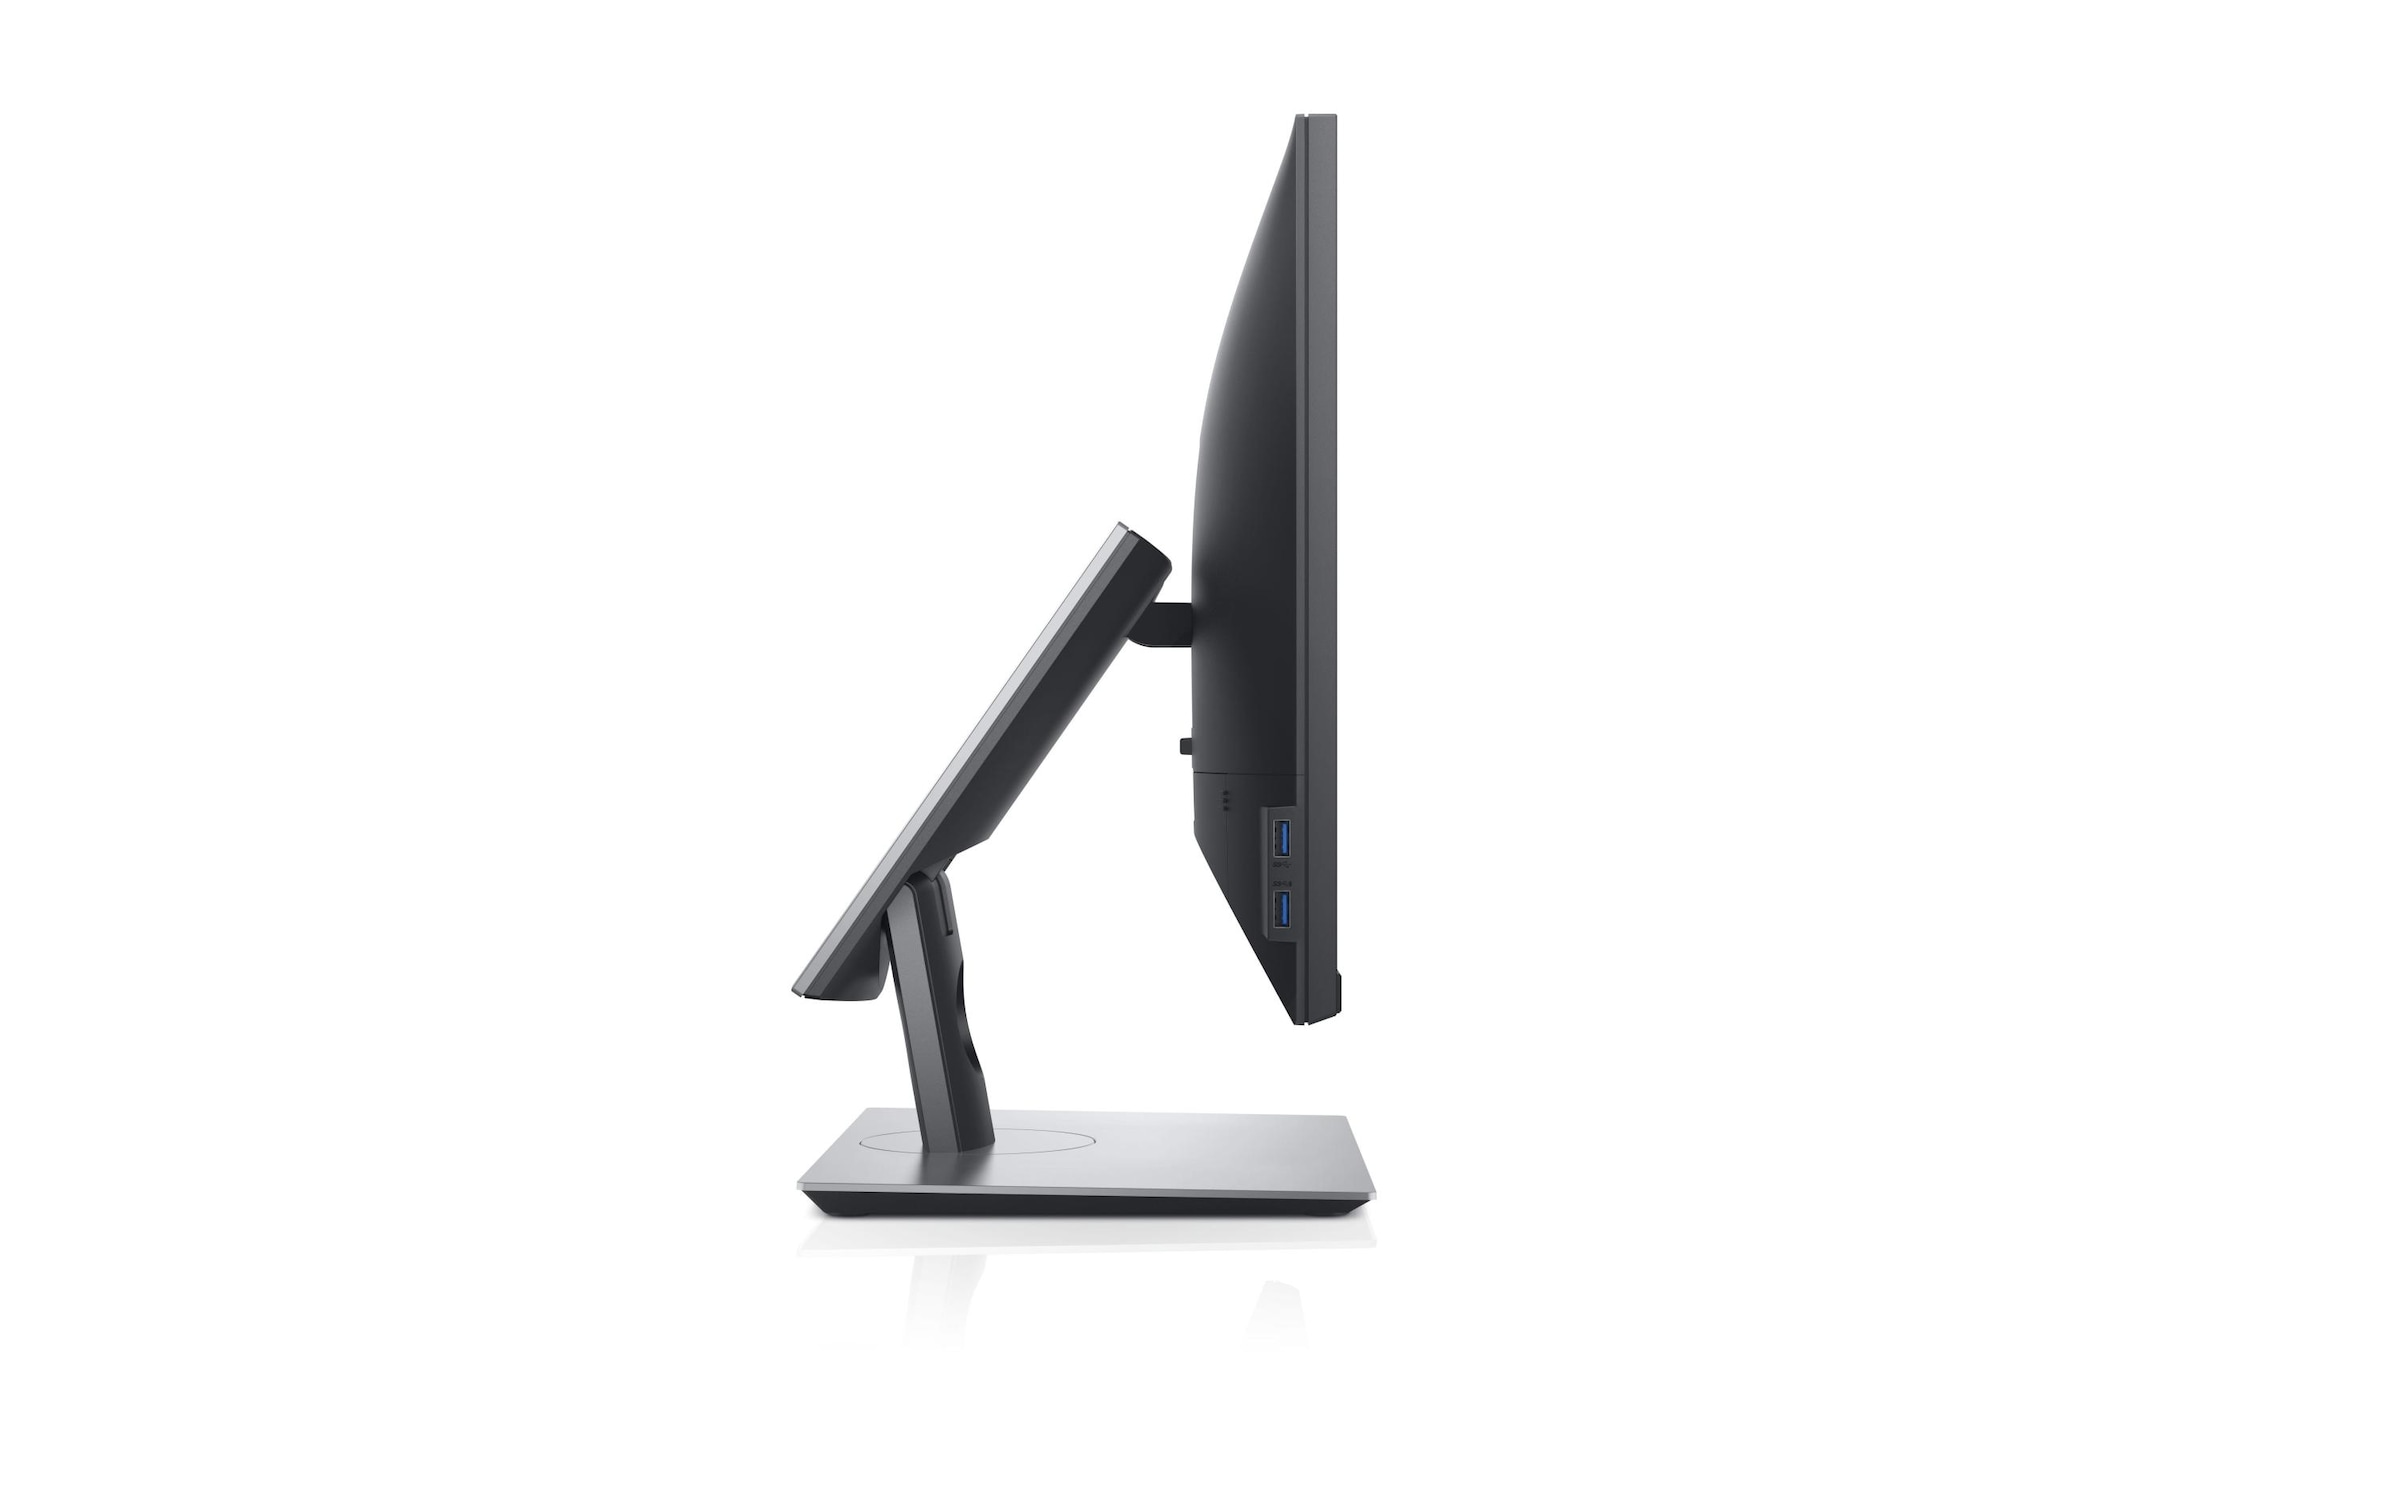 Dell LCD-Monitor »P2418HT«, 60,5 cm/23,8 Zoll, 1920 x 1080 px